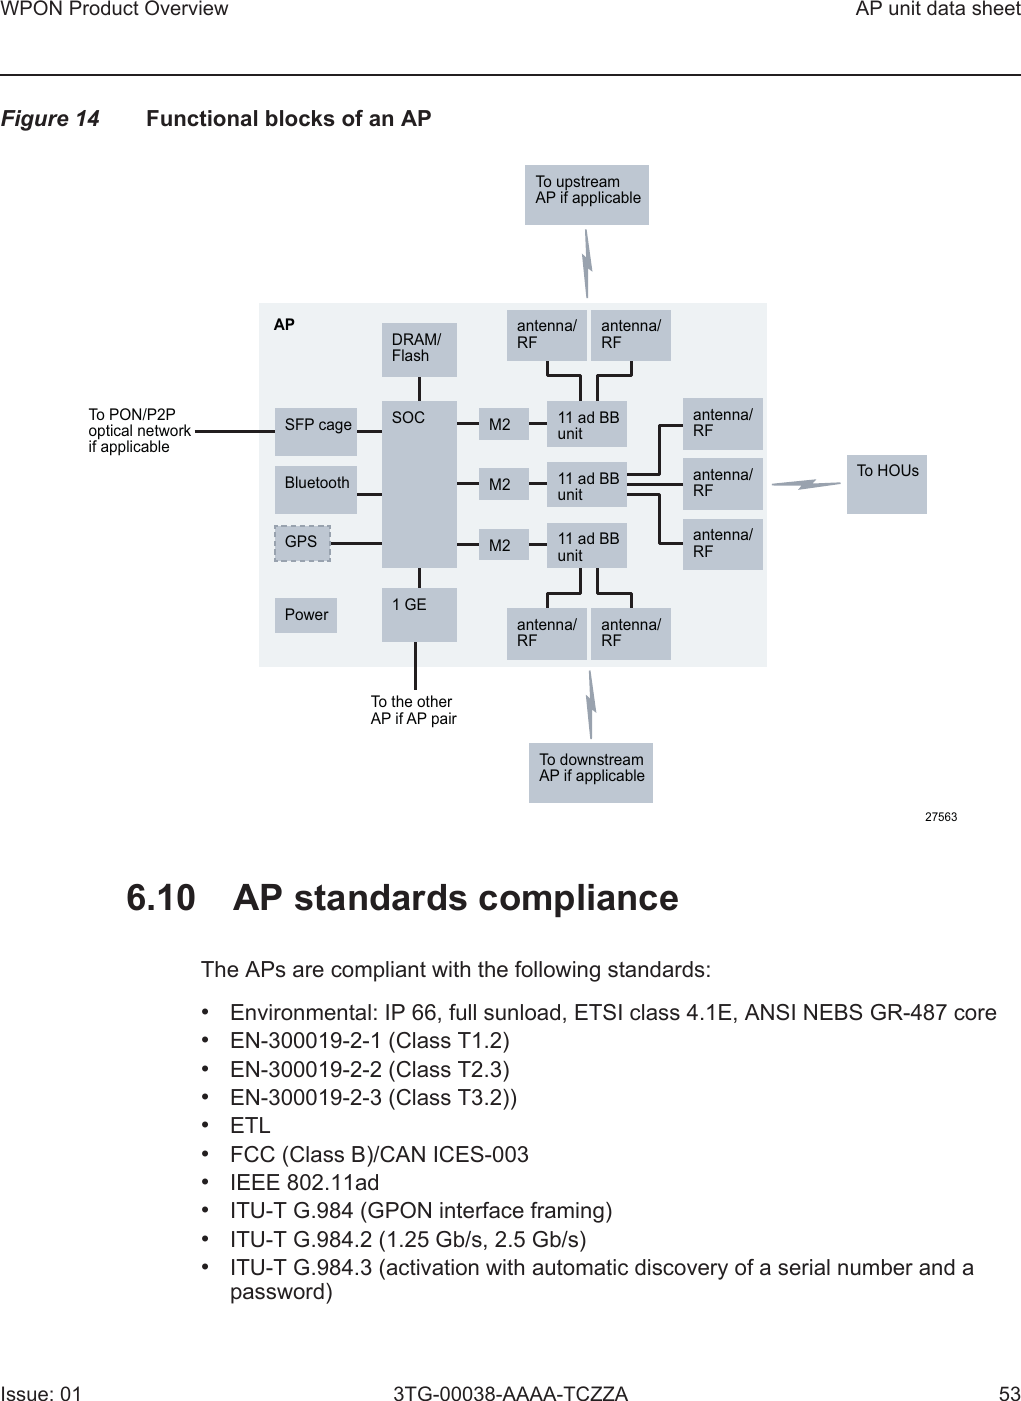 WPON Product Overview AP unit data sheetIssue: 01 3TG-00038-AAAA-TCZZA 53Figure 14 Functional blocks of an AP6.10 AP standards complianceThe APs are compliant with the following standards: •Environmental: IP 66, full sunload, ETSI class 4.1E, ANSI NEBS GR-487 core•EN-300019-2-1 (Class T1.2)•EN-300019-2-2 (Class T2.3)•EN-300019-2-3 (Class T3.2))•ETL•FCC (Class B)/CAN ICES-003•IEEE 802.11ad•ITU-T G.984 (GPON interface framing)•ITU-T G.984.2 (1.25 Gb/s, 2.5 Gb/s)•ITU-T G.984.3 (activation with automatic discovery of a serial number and apassword)To HOUsTo PON/P2Poptical networkif applicableM2SFP cageBluetoothGPSPowerM2M2antenna/RFantenna/RFantenna/RFantenna/RFantenna/RFTo upstreamAP if applicableTo downstreamAP if applicableSOCDRAM/FlashTo the otherAP if AP pair11 ad BBunit11 ad BBunitAP antenna/RFantenna/RF11 ad BBunit1 GE27563